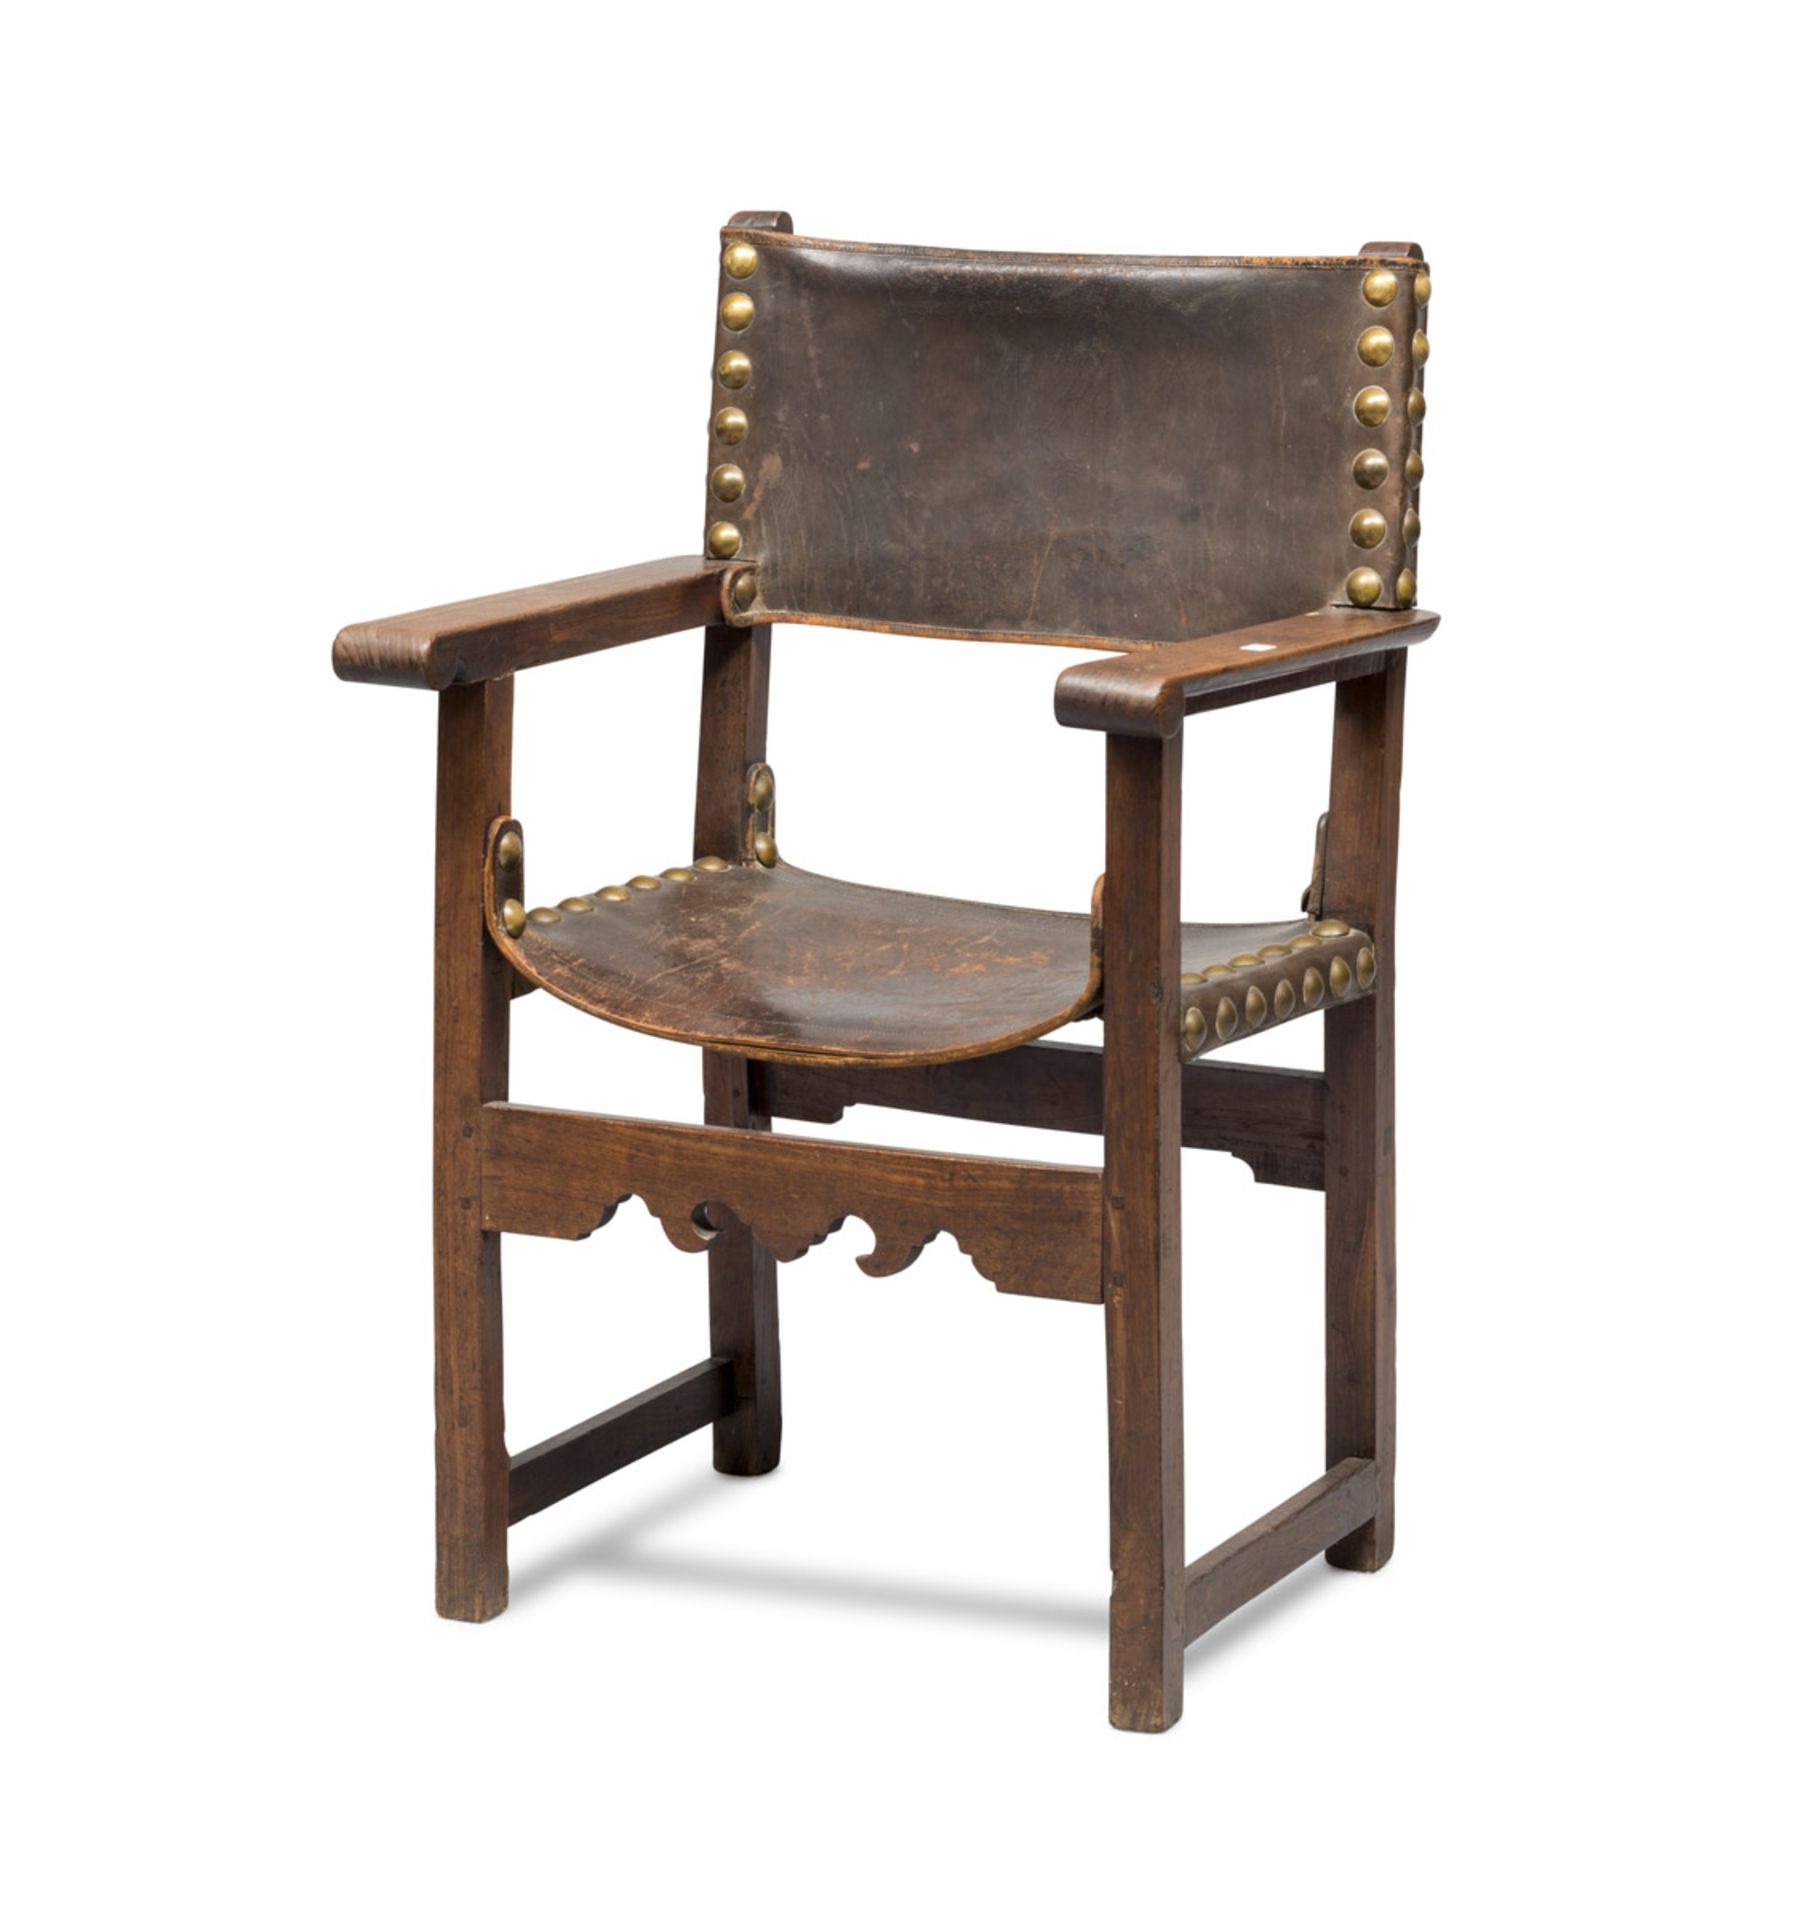 ARMCHAIR IN WALNUT, 18TH CENTURY with back and seat in leather, flat arms and straight legs.